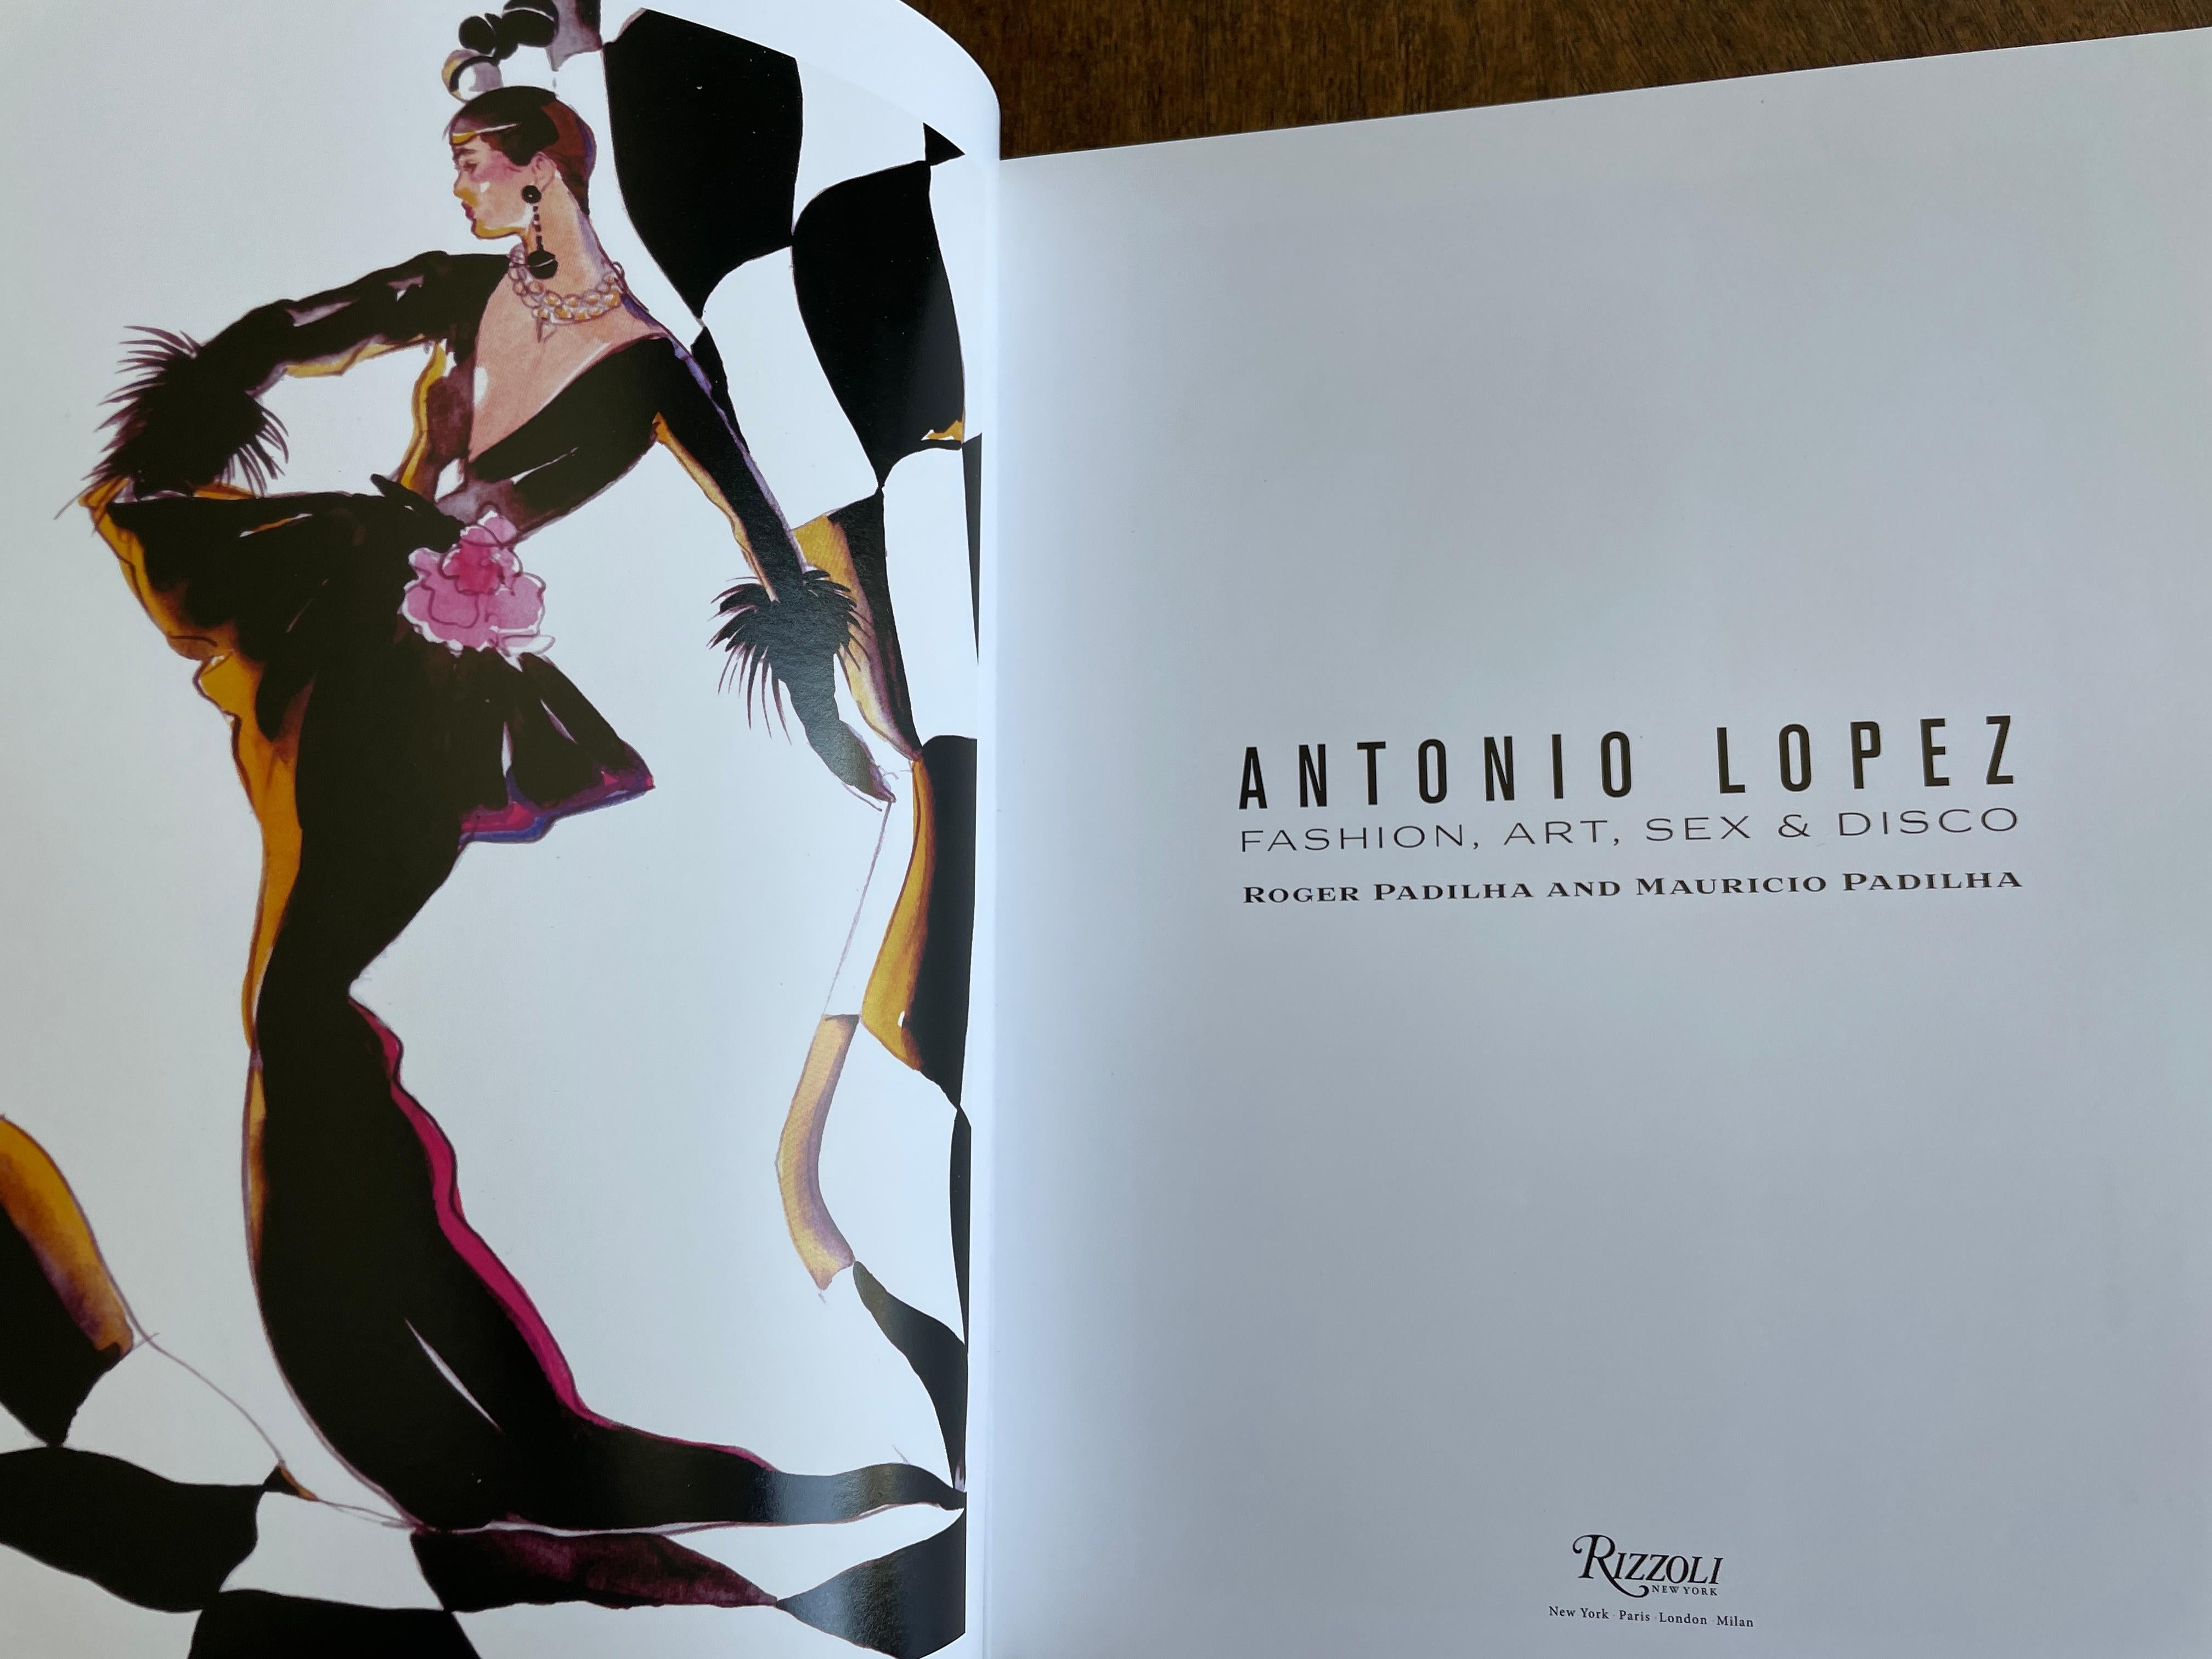 
Antonio Lopez: Fashion, Art, Sex & Disco, by Roger Padilha and Mauricio Padilha. 
Foreword by André Leon Talley; epilogue by Anna Sui. New York: Rizzoli, 2012, 304 pages.9.9 x 1.3 x 12.4 inches.
